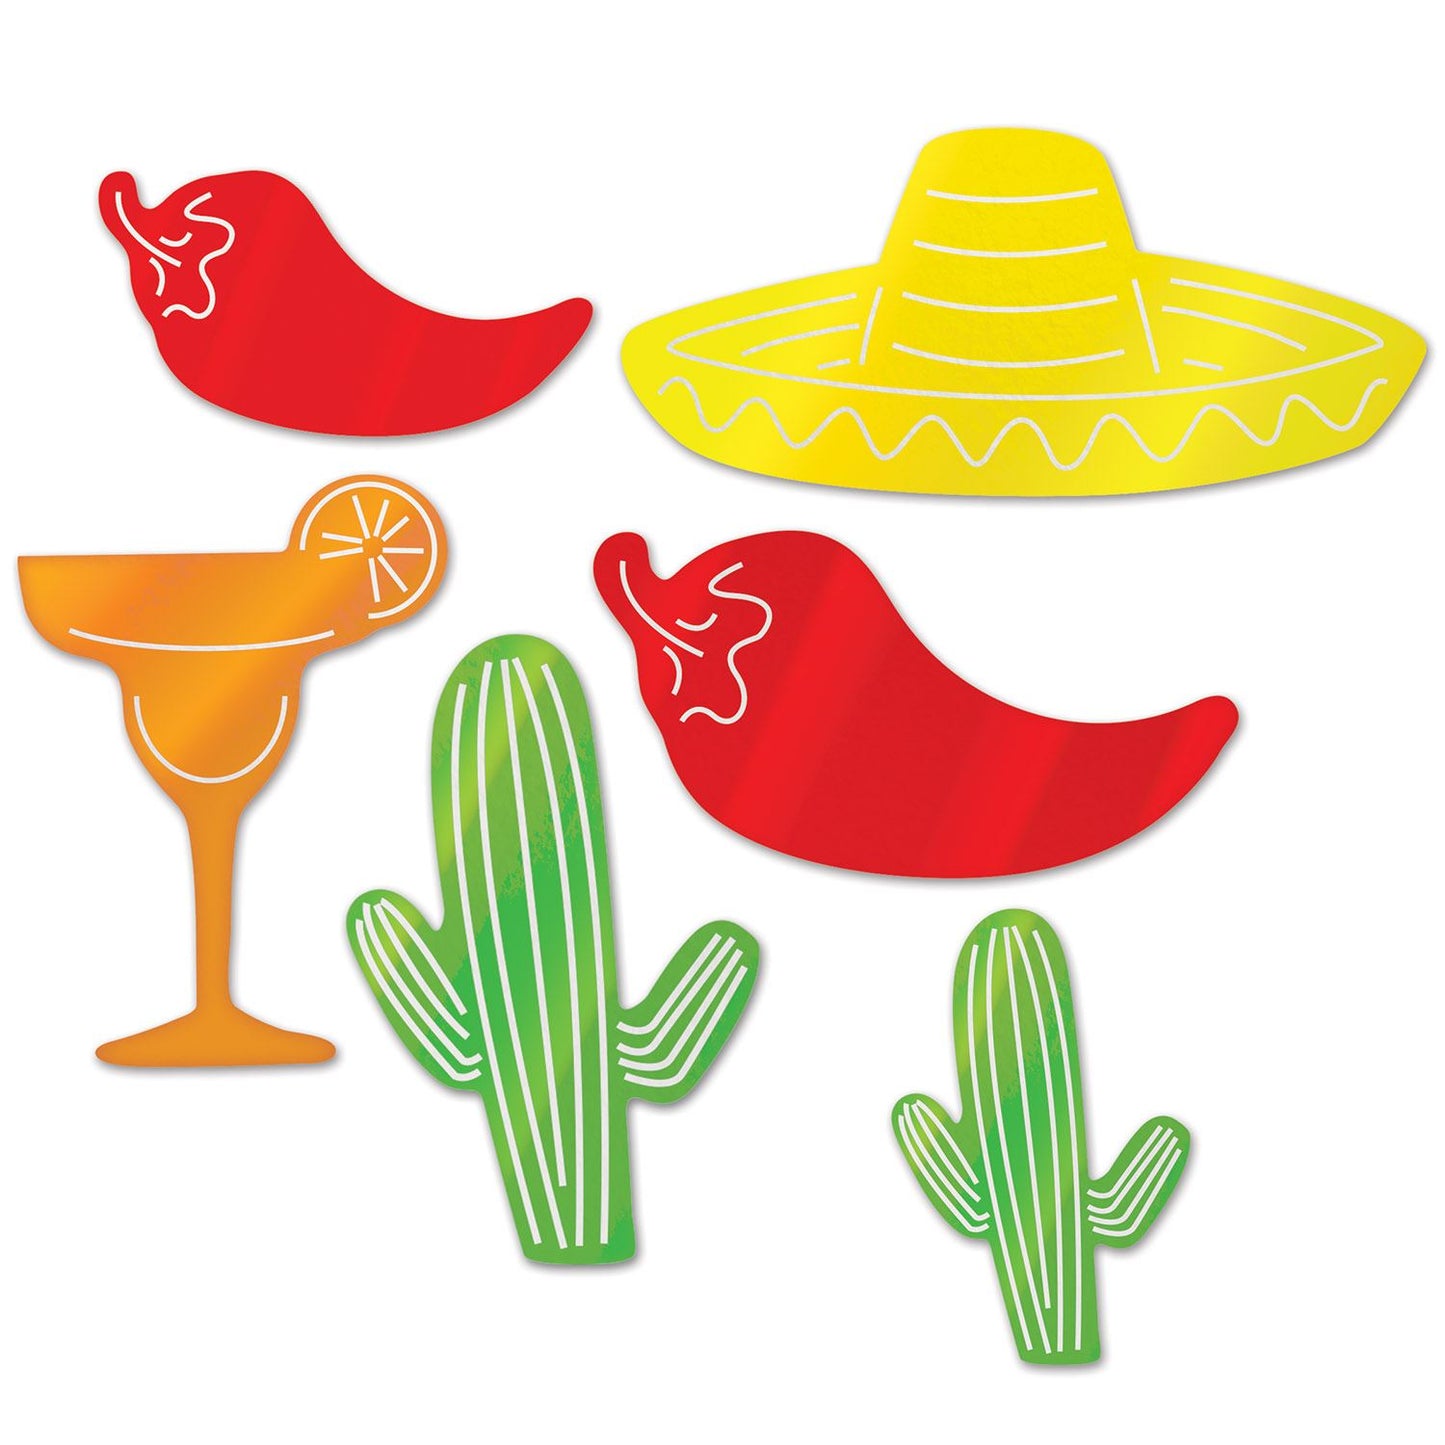 Beistle Foil Fiesta Silhouettes - Party Supply Decoration for Fiesta / Cinco de Mayo